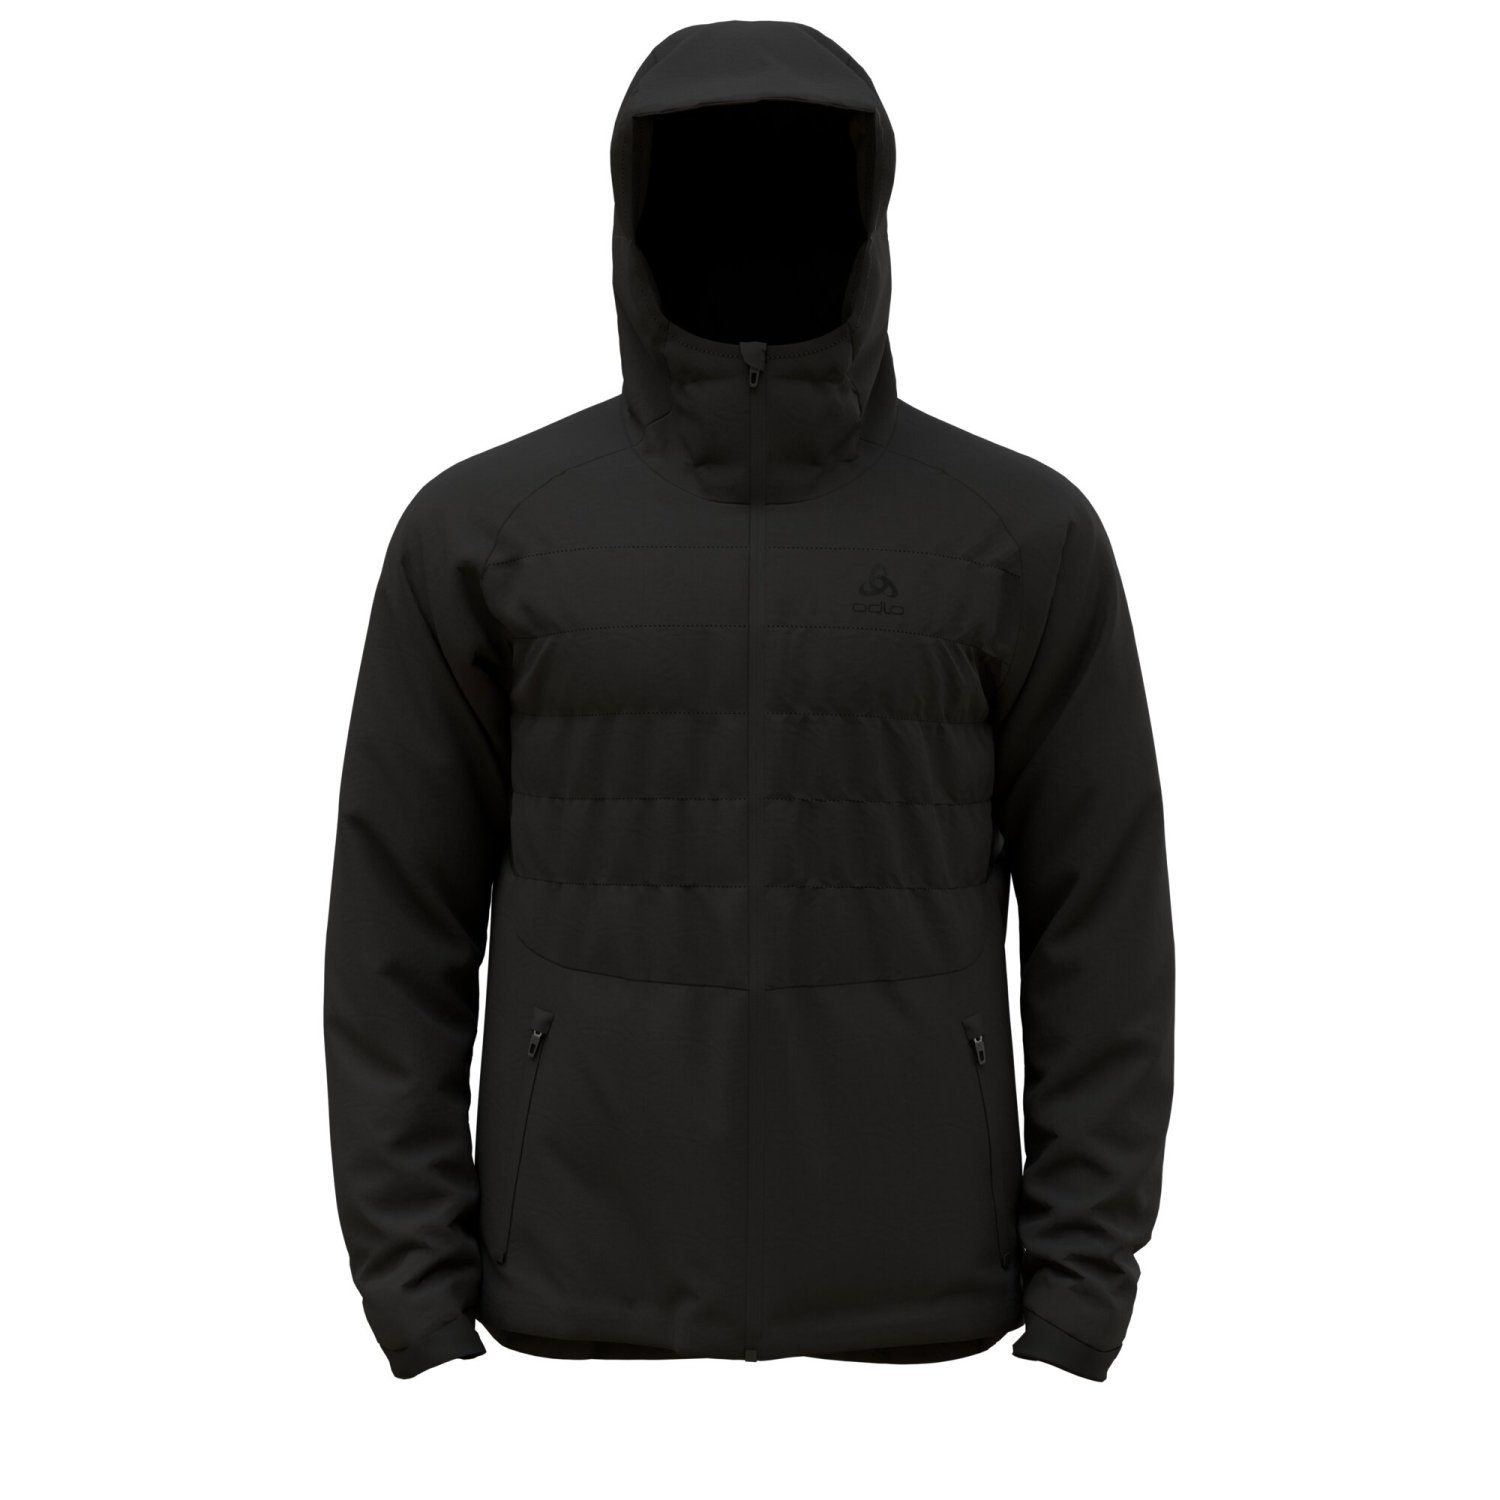 ASCENT S-THER Jacket insulated Odlo Anorak